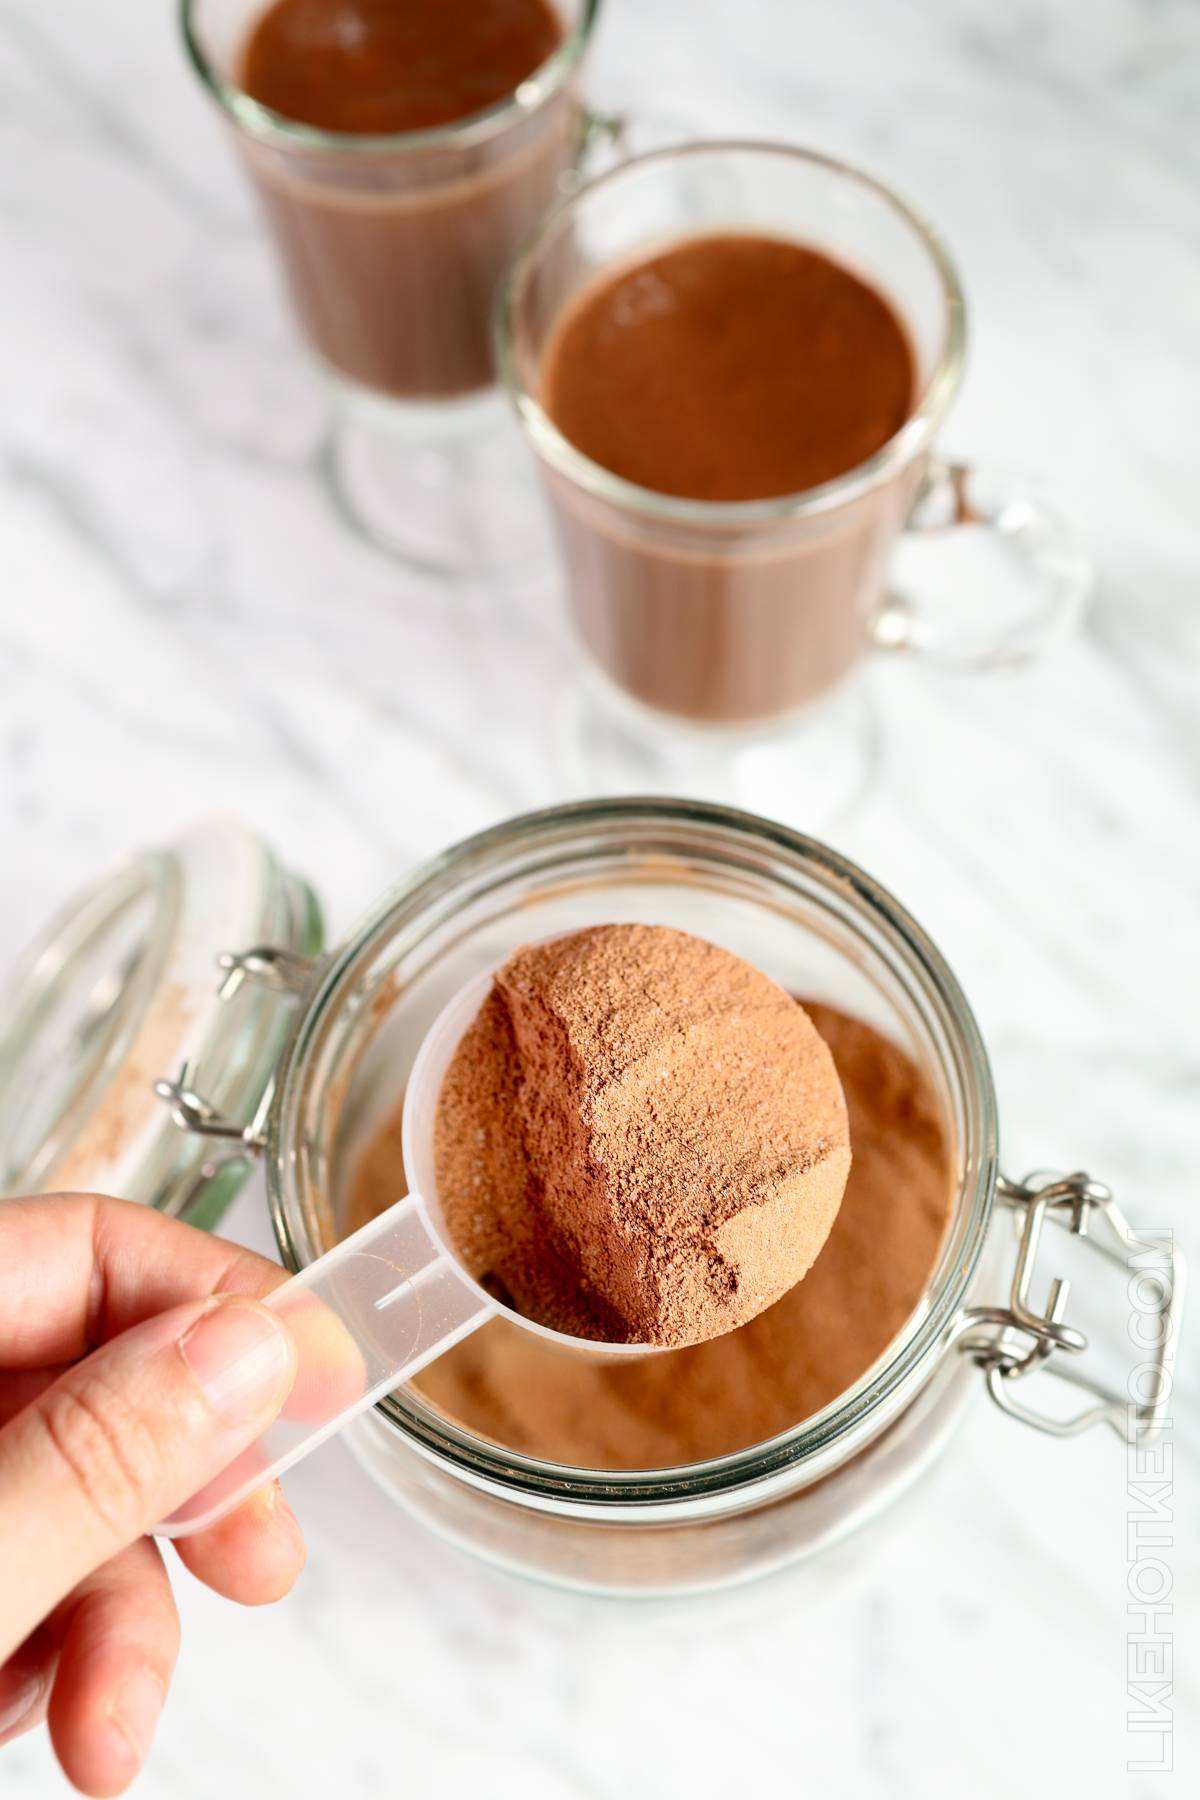 Whey protein keto hot cocoa powder mix being scooped out of jar.